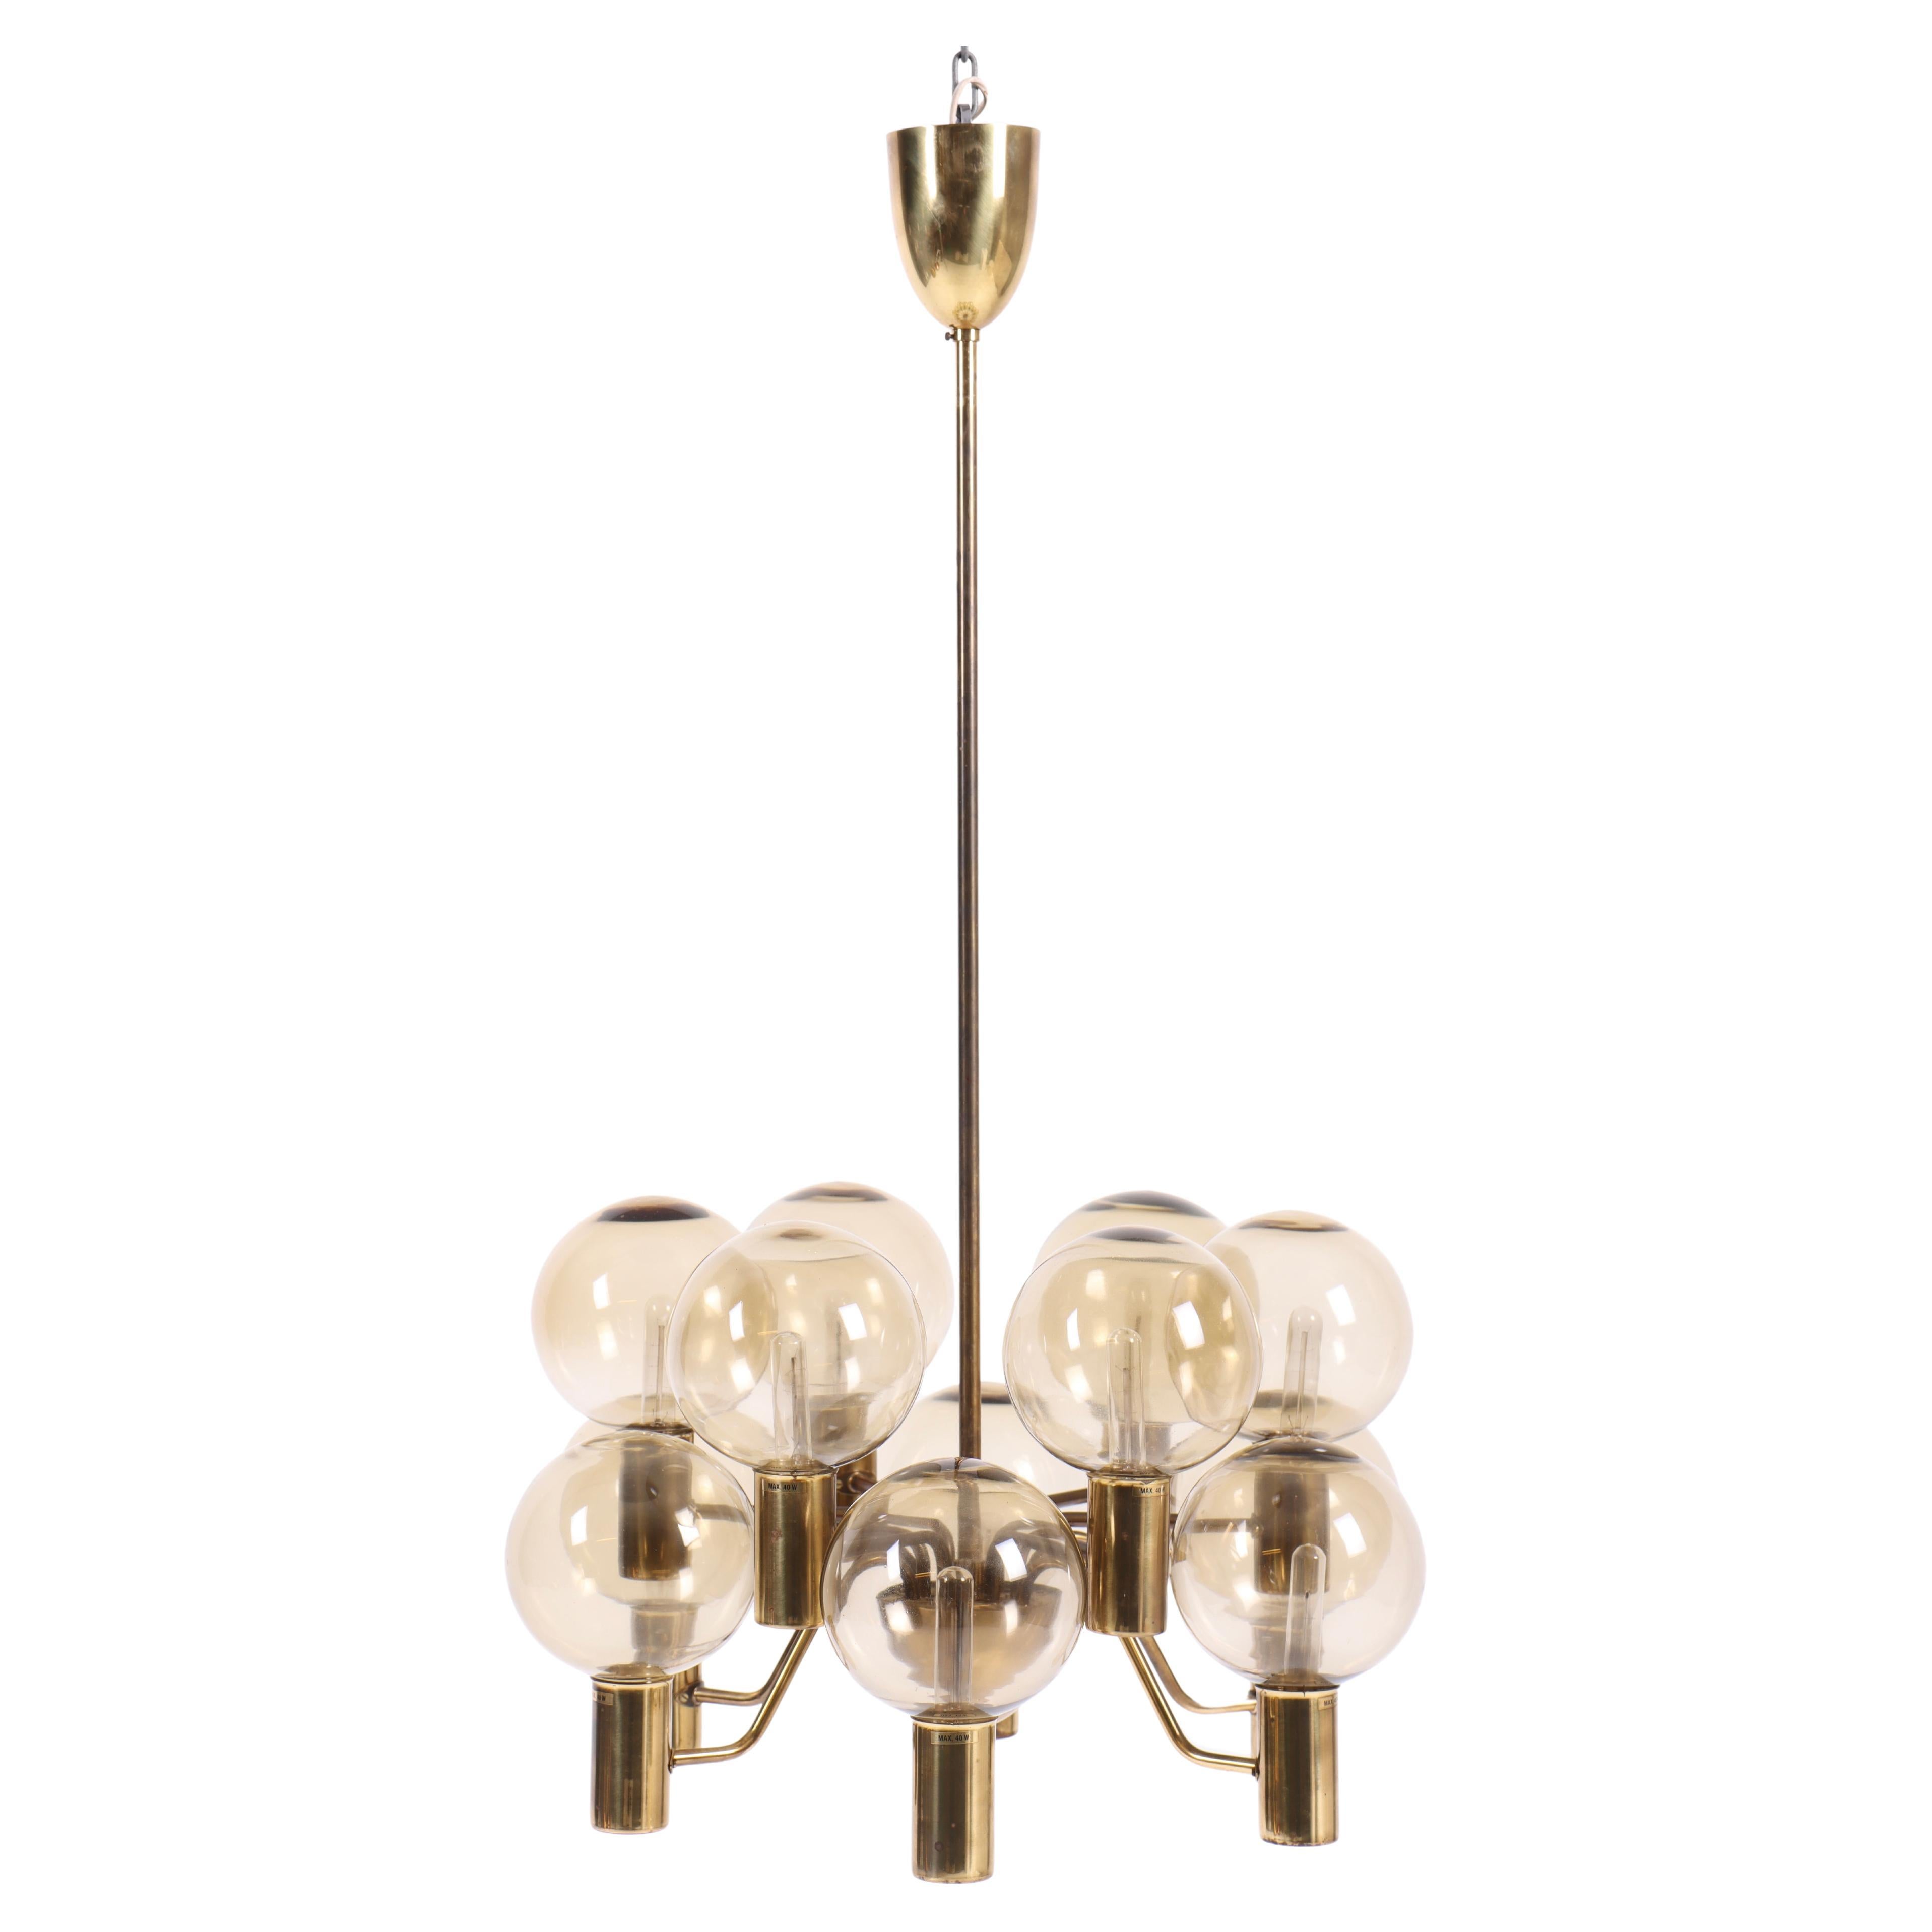 Midcentury ""Patricia" Chandelier in Brass and Glass, by Hans-Agne Jakobsson For Sale